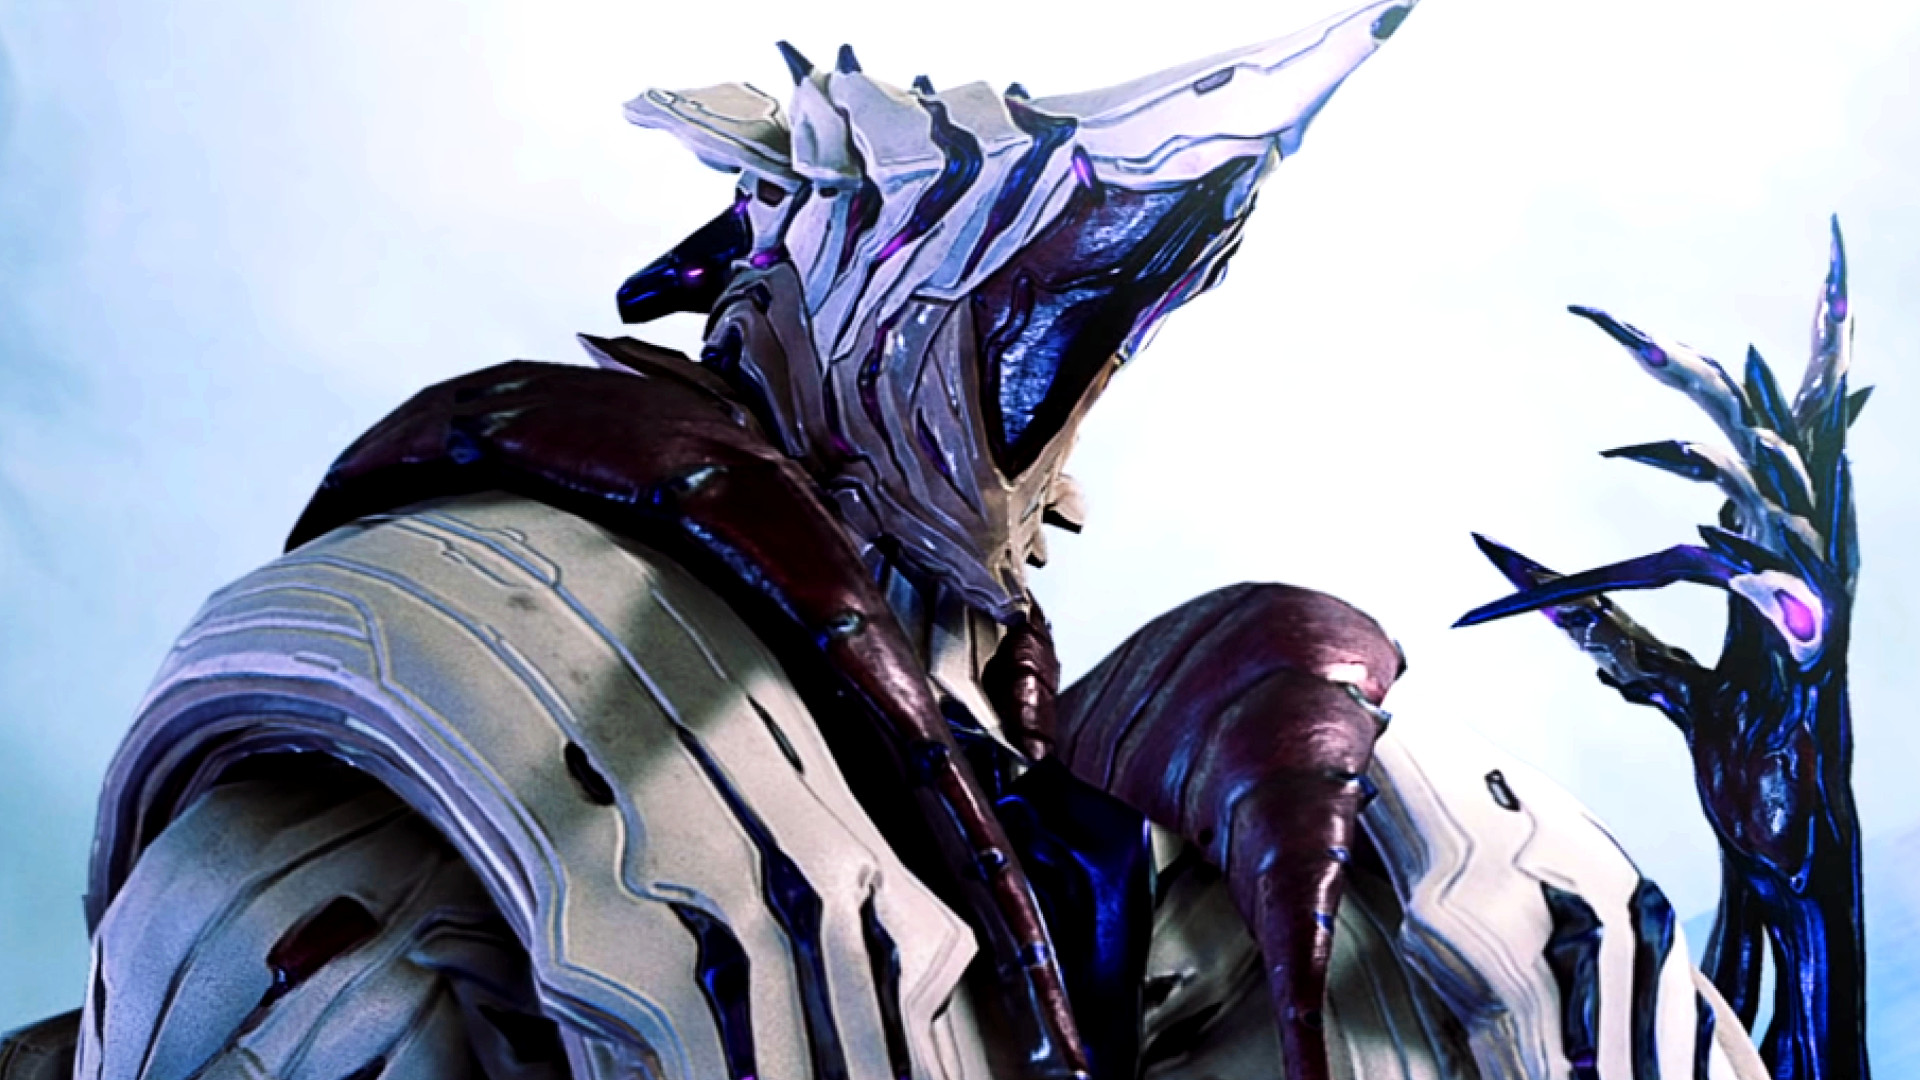 Snag a free Warframe for your collection with Twitch Drops